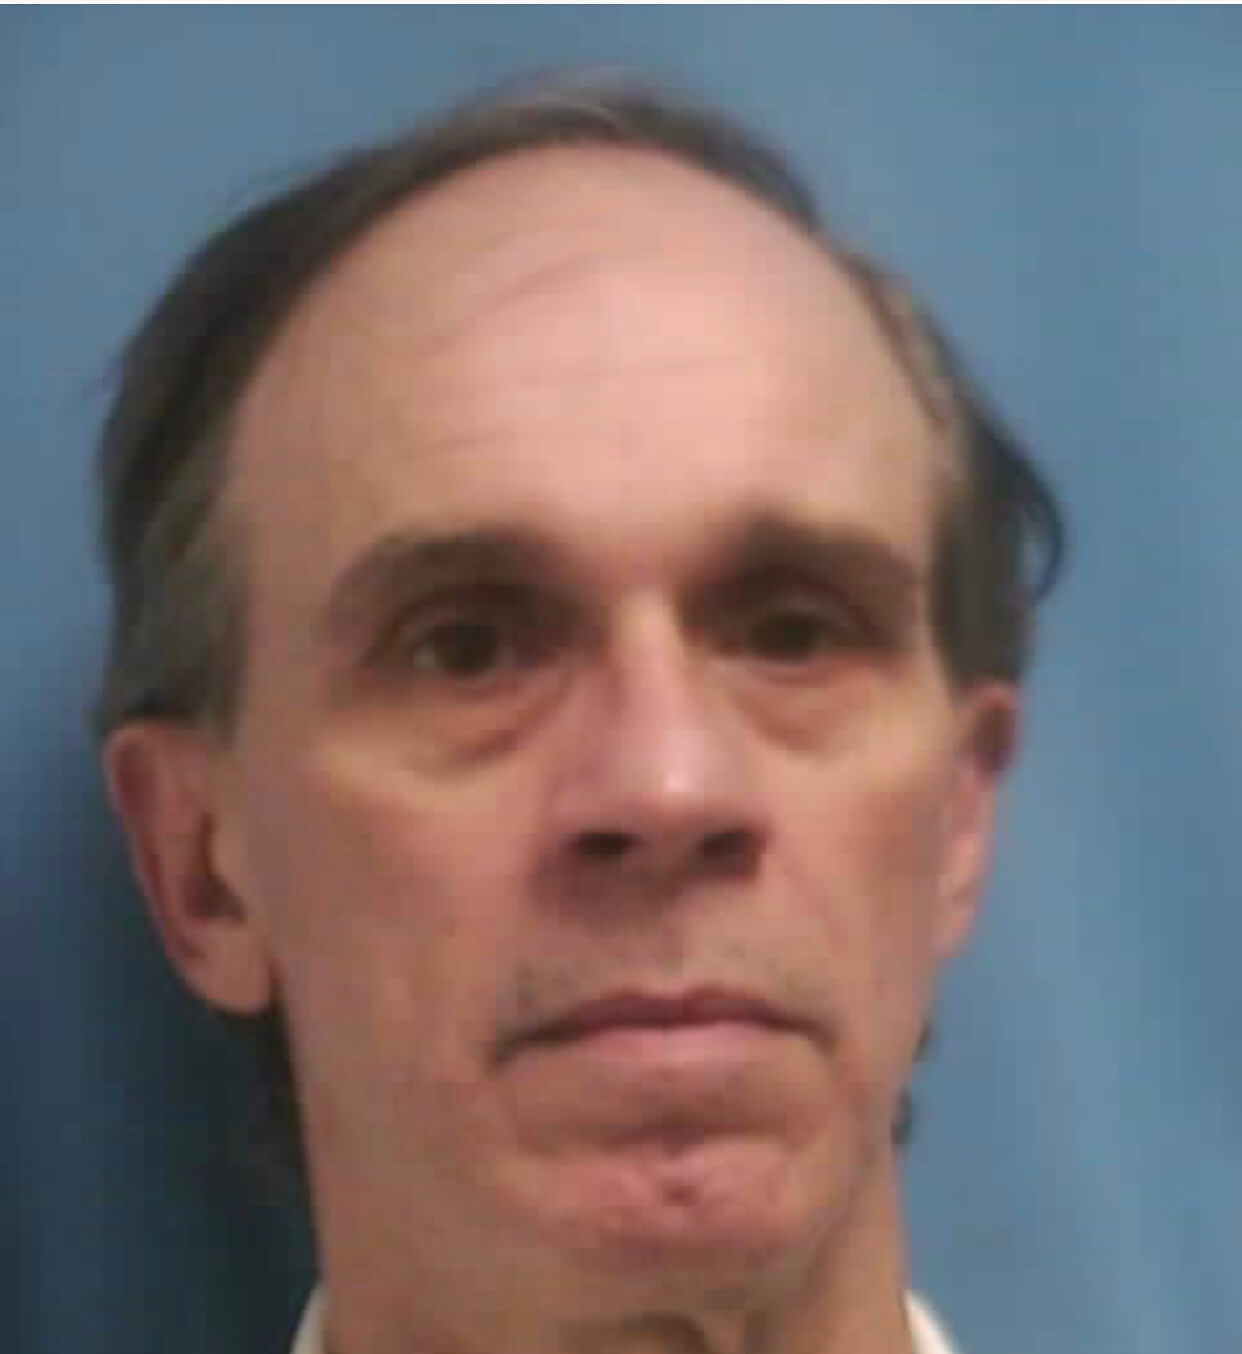 Police looking for man serving life who has escaped from Parchman for third time